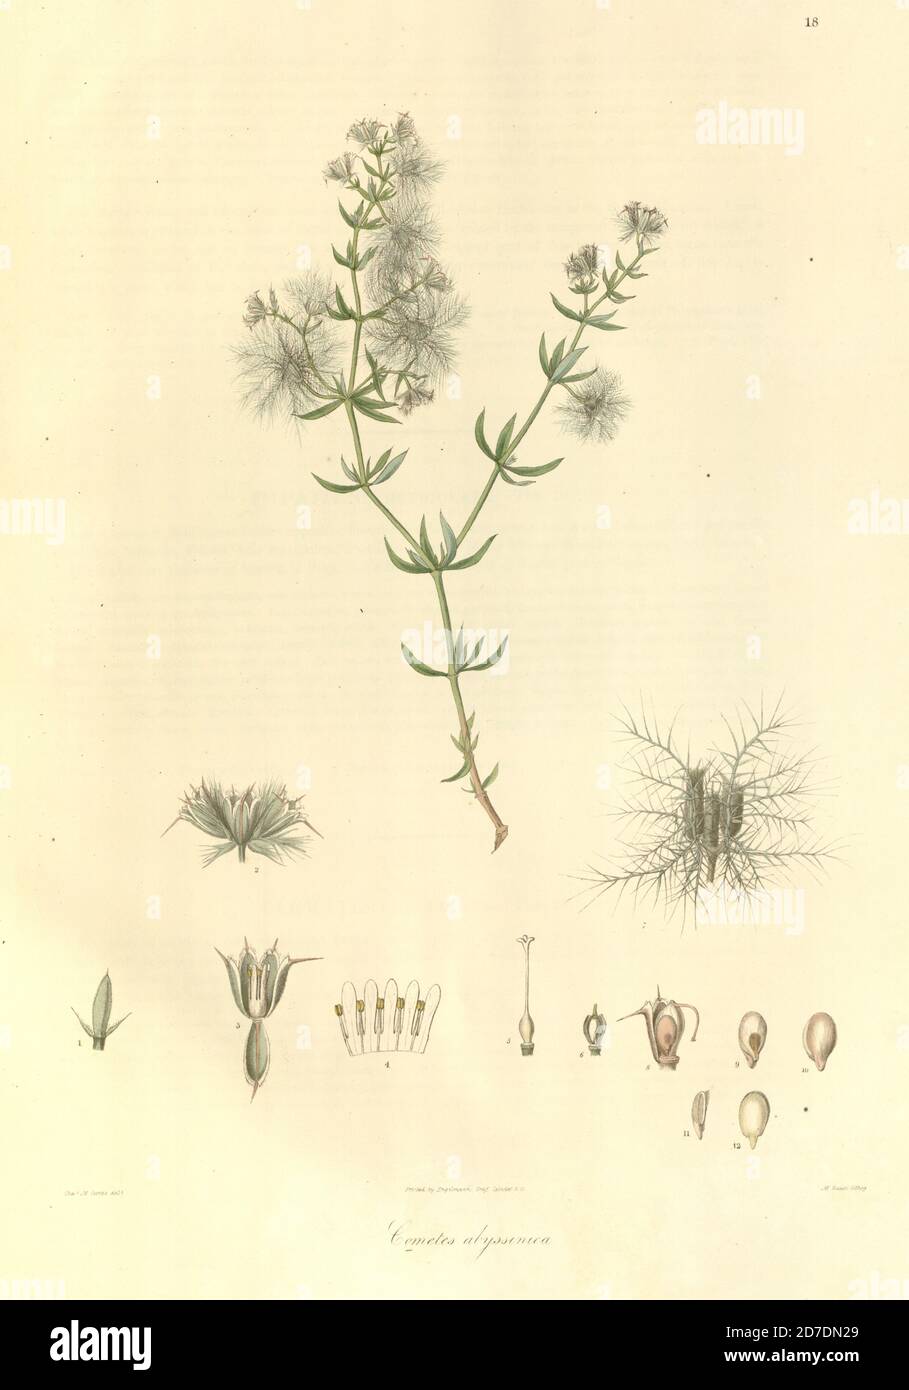 Cometes abyssinica From Plantae Asiaticae rariores, or, Descriptions and figures of a select number of unpublished East Indian plants Volume 1 by N. Wallich. Nathaniel Wolff Wallich FRS FRSE (28 January 1786 – 28 April 1854) was a surgeon and botanist of Danish origin who worked in India, initially in the Danish settlement near Calcutta and later for the Danish East India Company and the British East India Company. He was involved in the early development of the Calcutta Botanical Garden, describing many new plant species and developing a large herbarium collection which was distributed to col Stock Photo